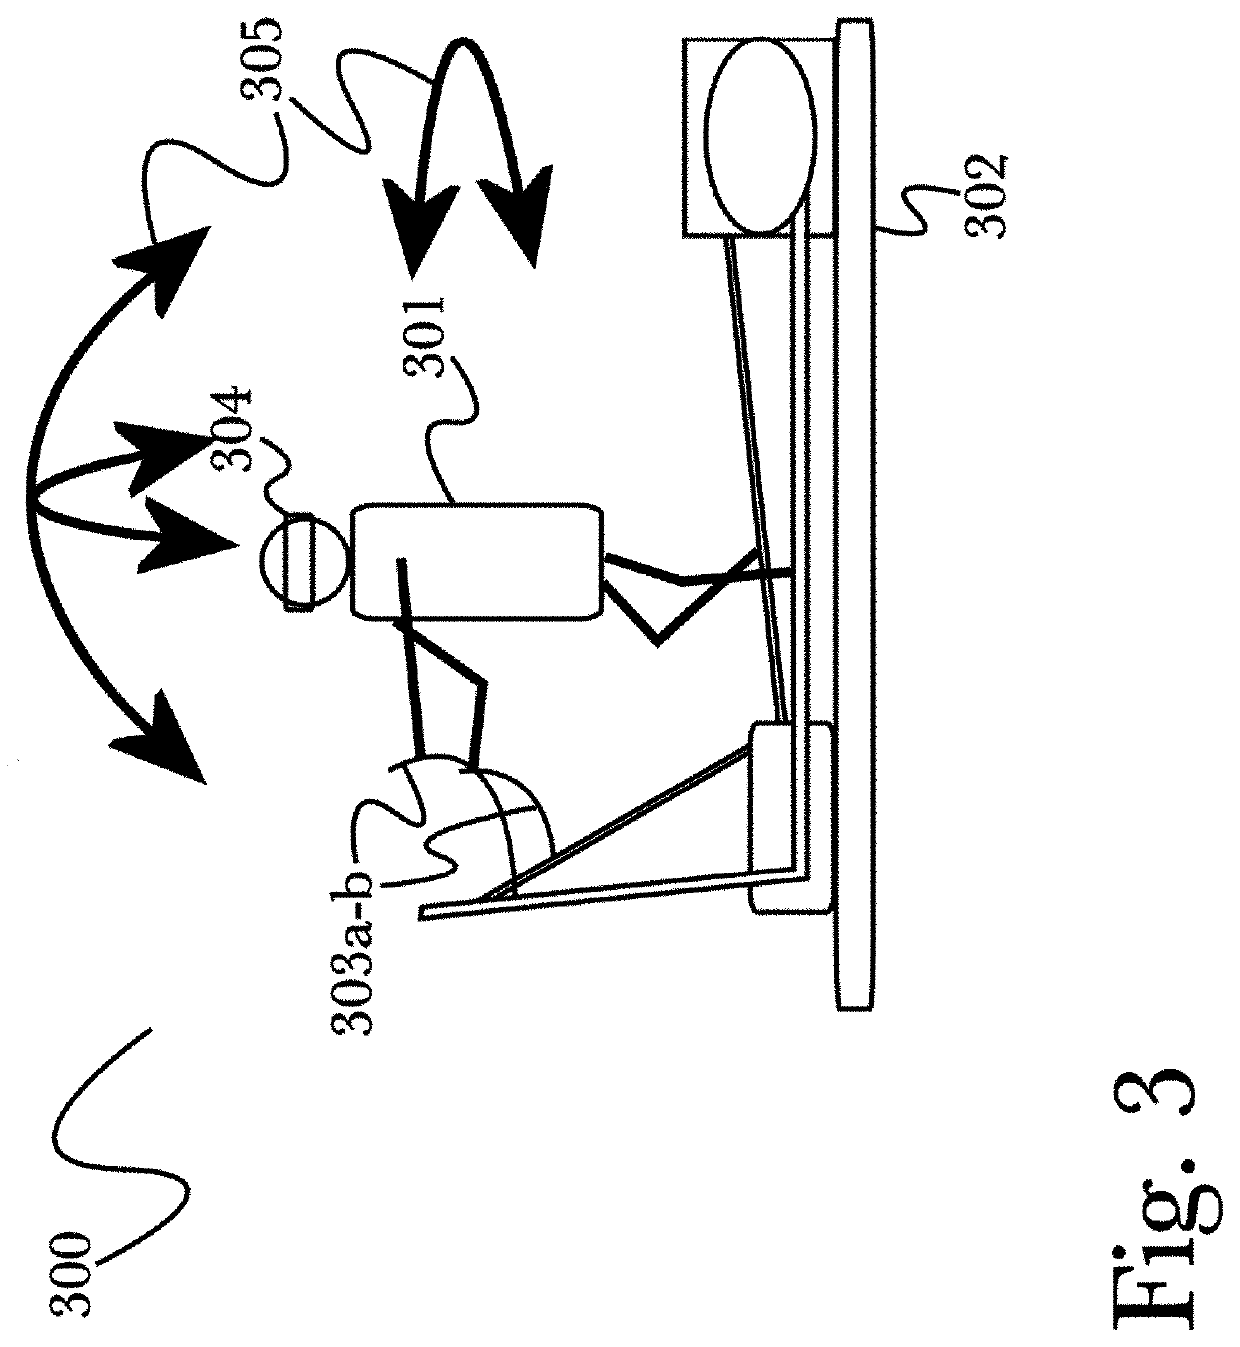 Full body movement control of dual joystick operated devices